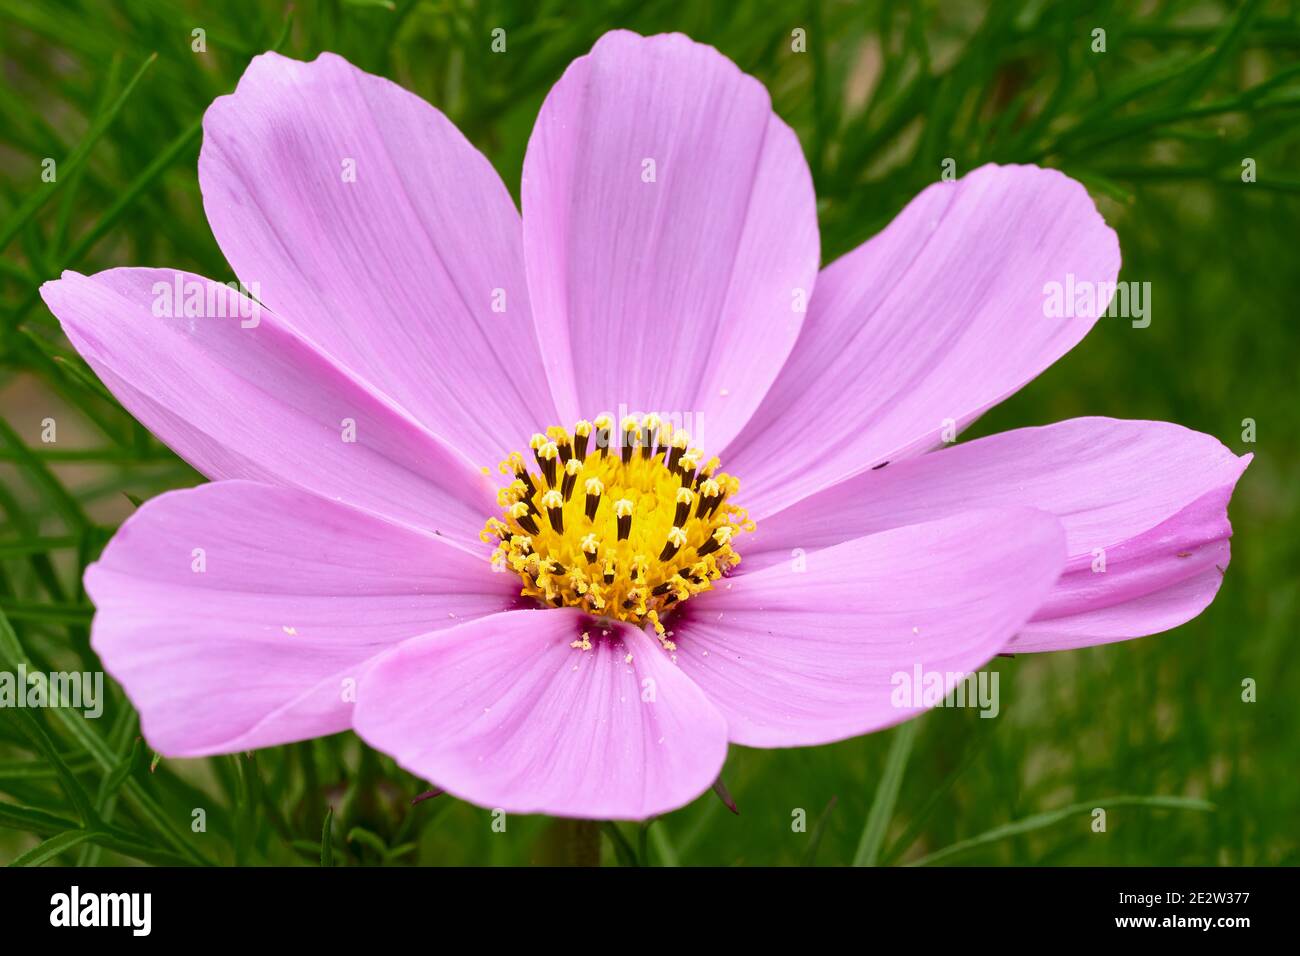 Cosmos flower close up Stock Photo